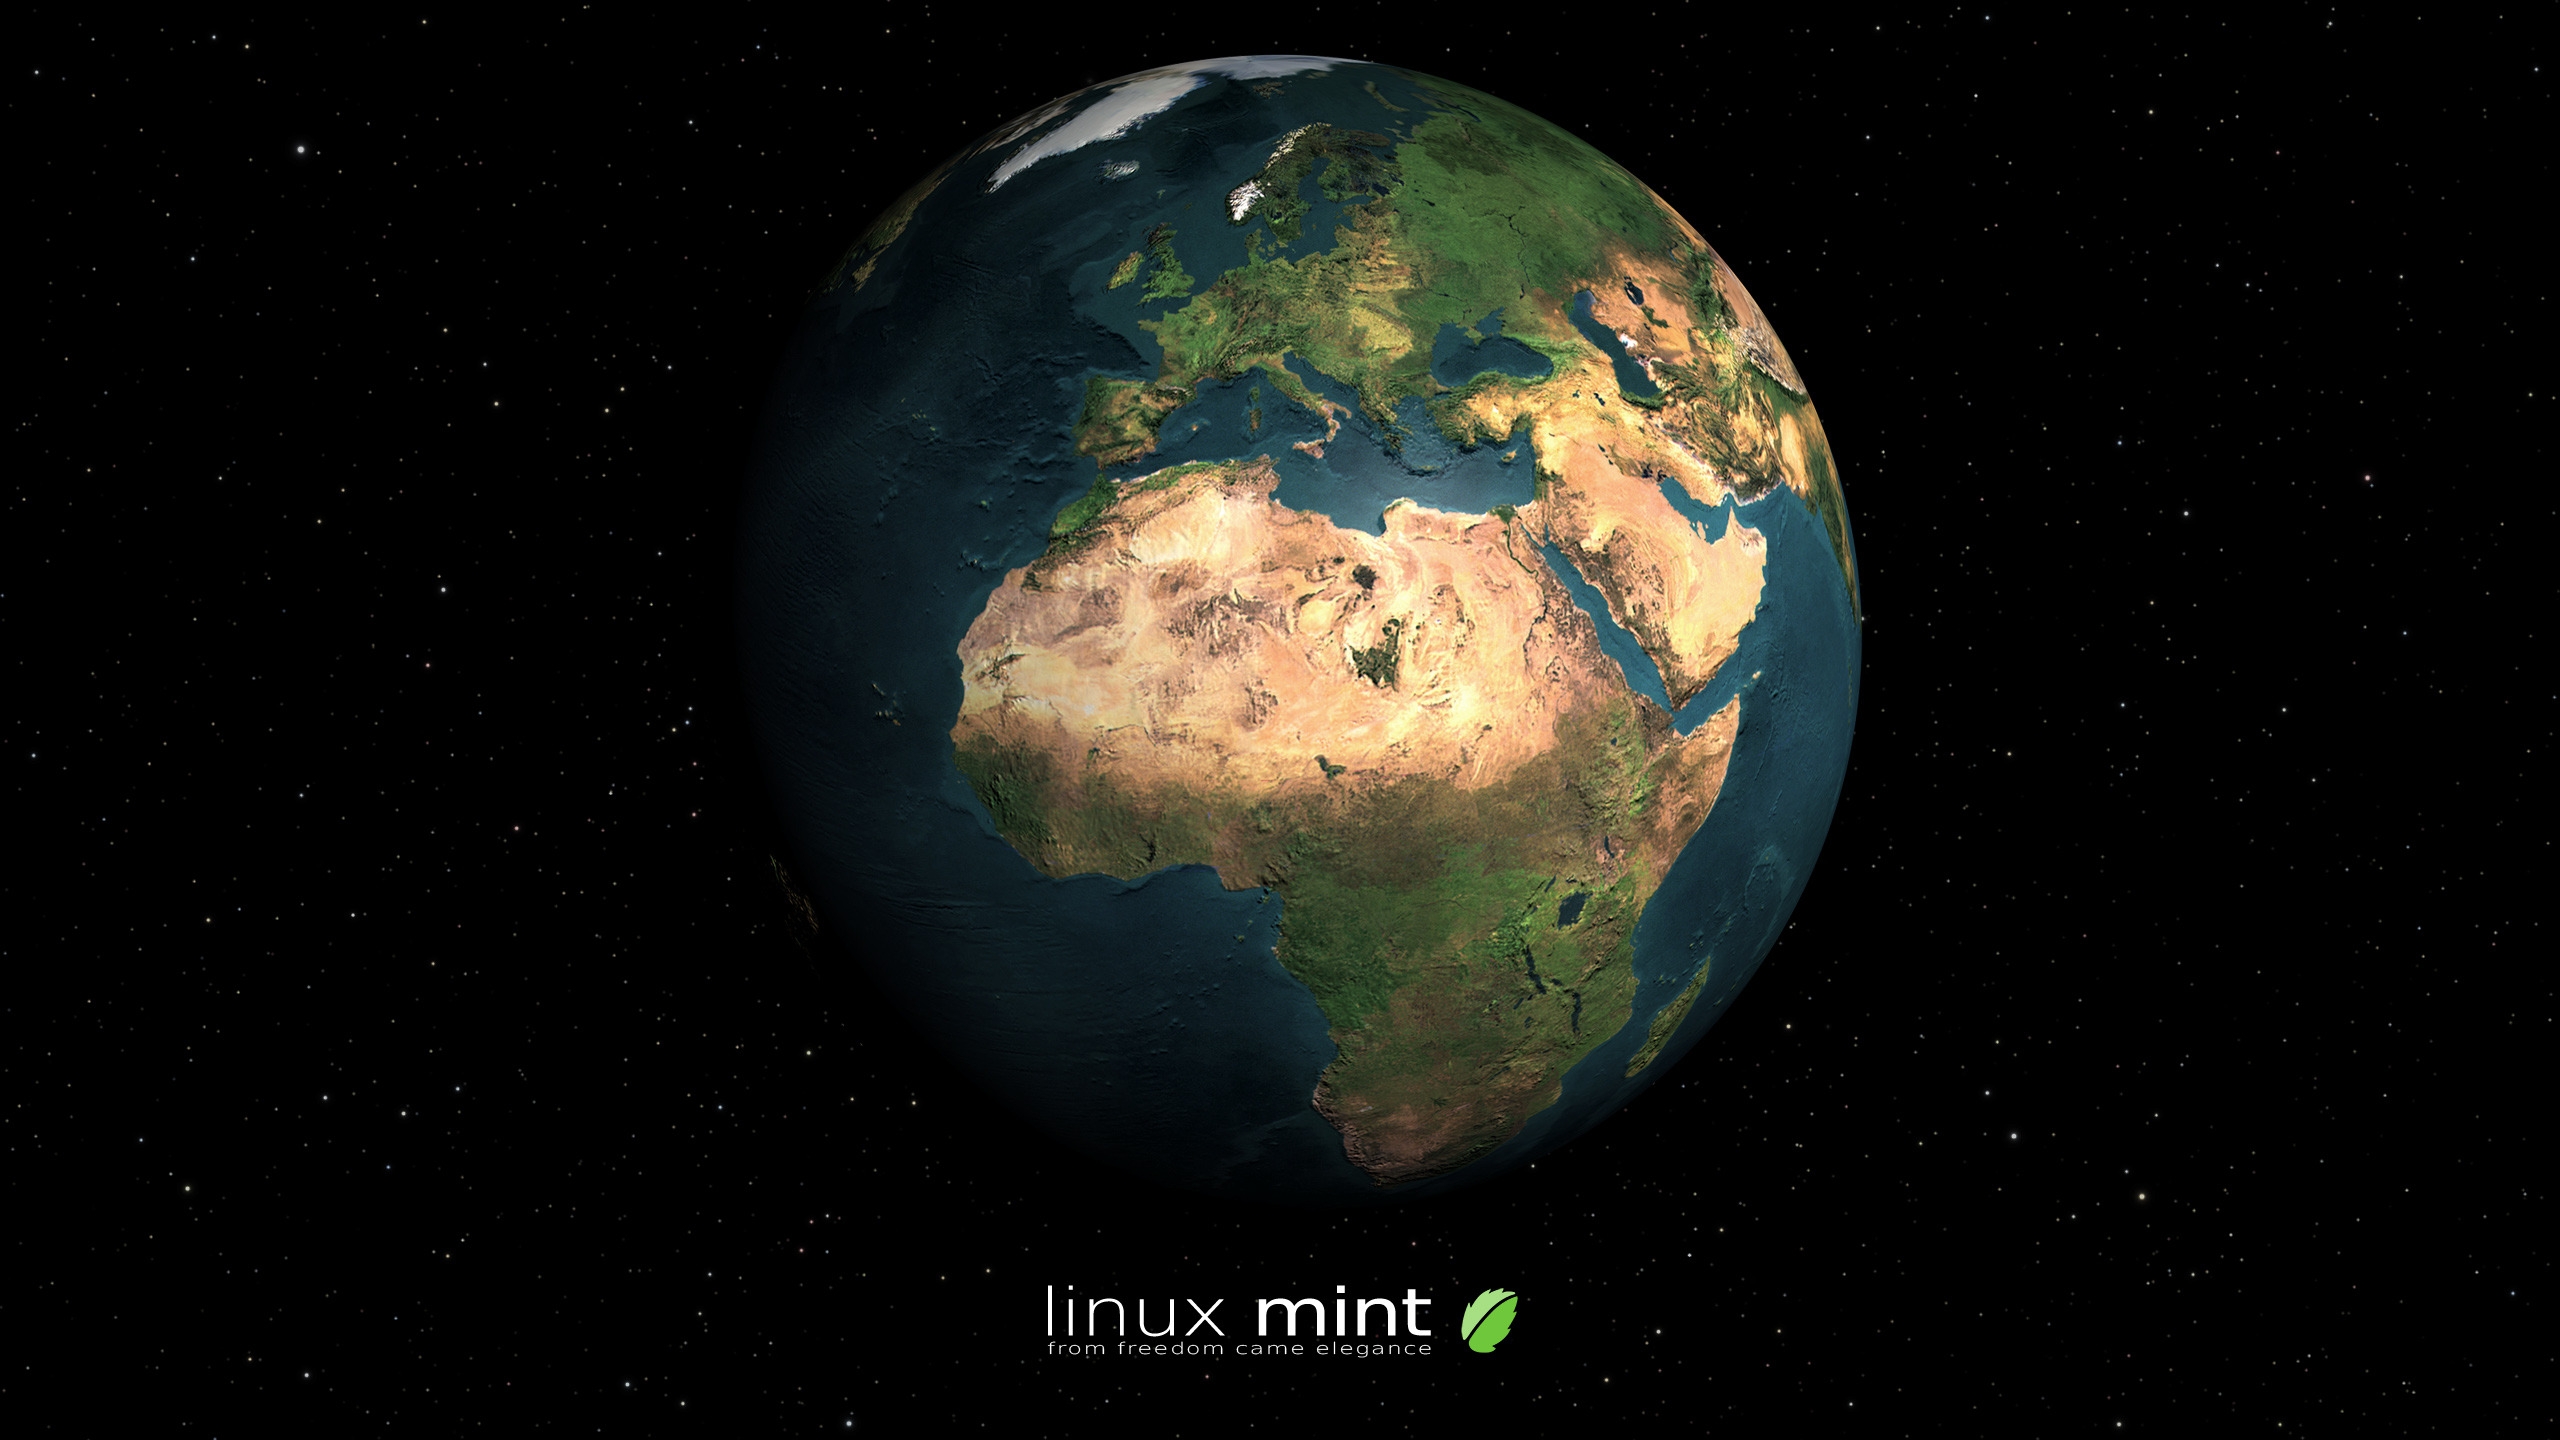 Linux Mint Earth for 2560x1440 HDTV resolution